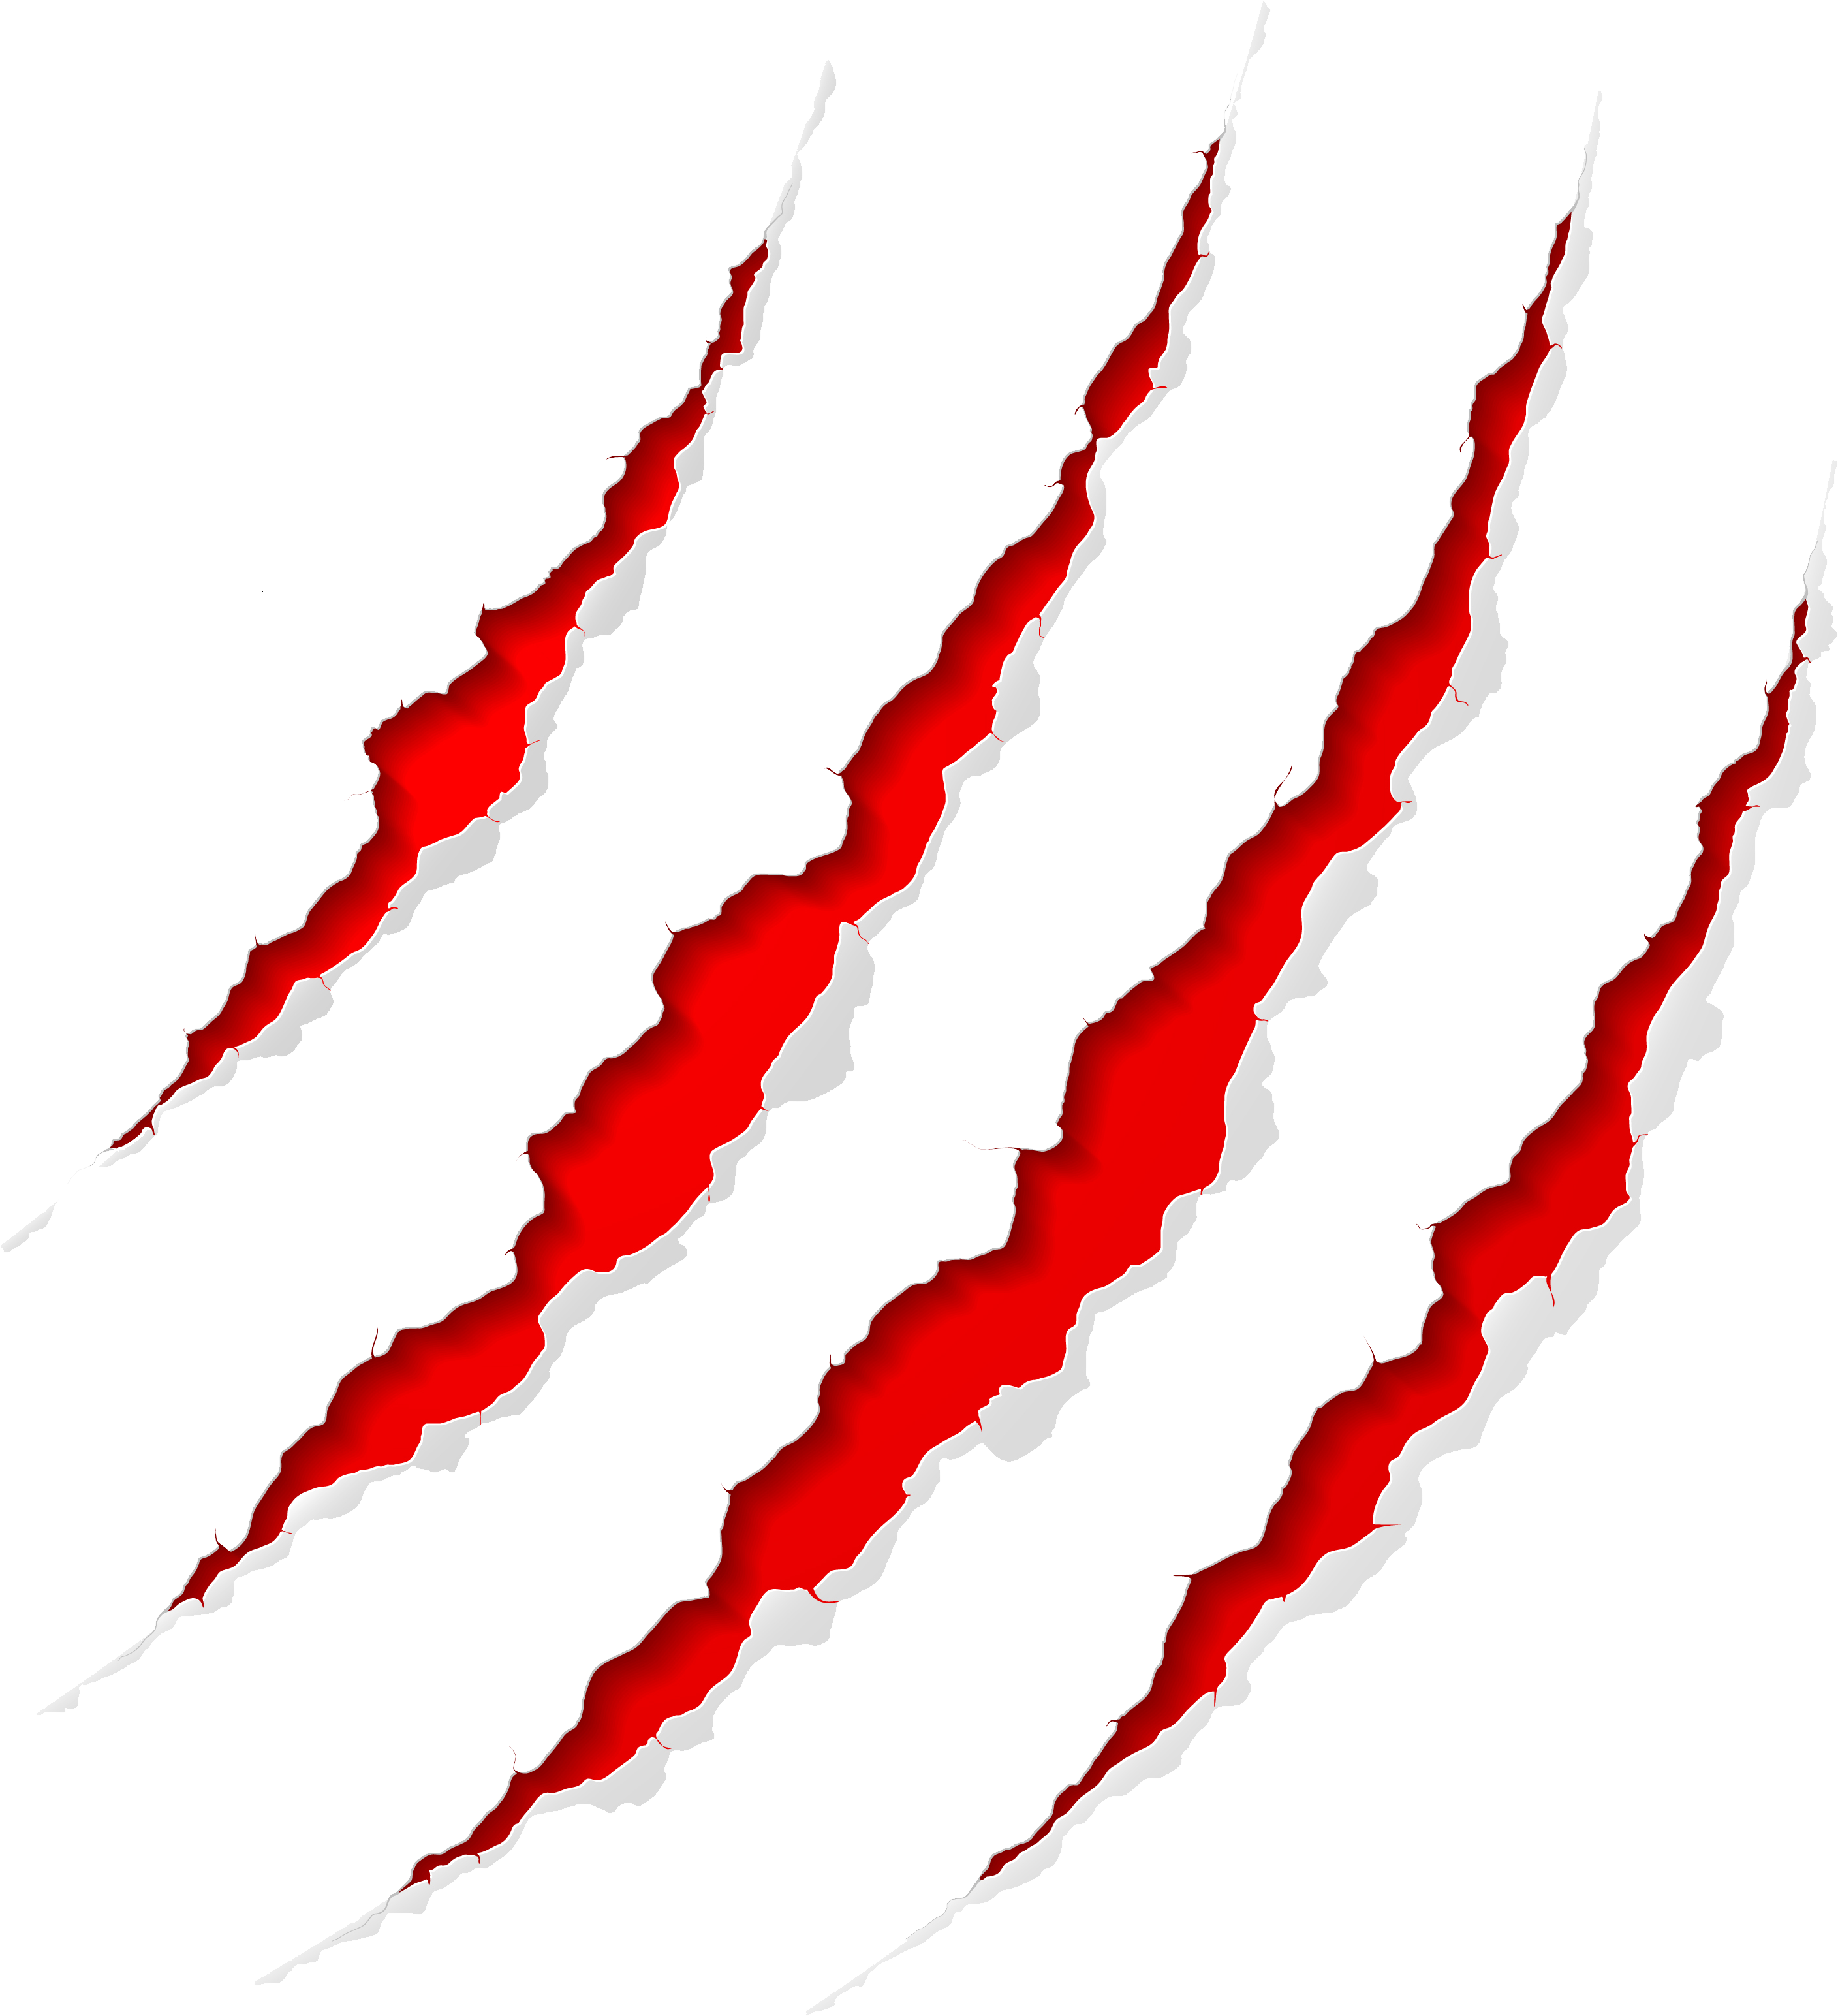 Bear claw scratch transparent. Blood explosion png